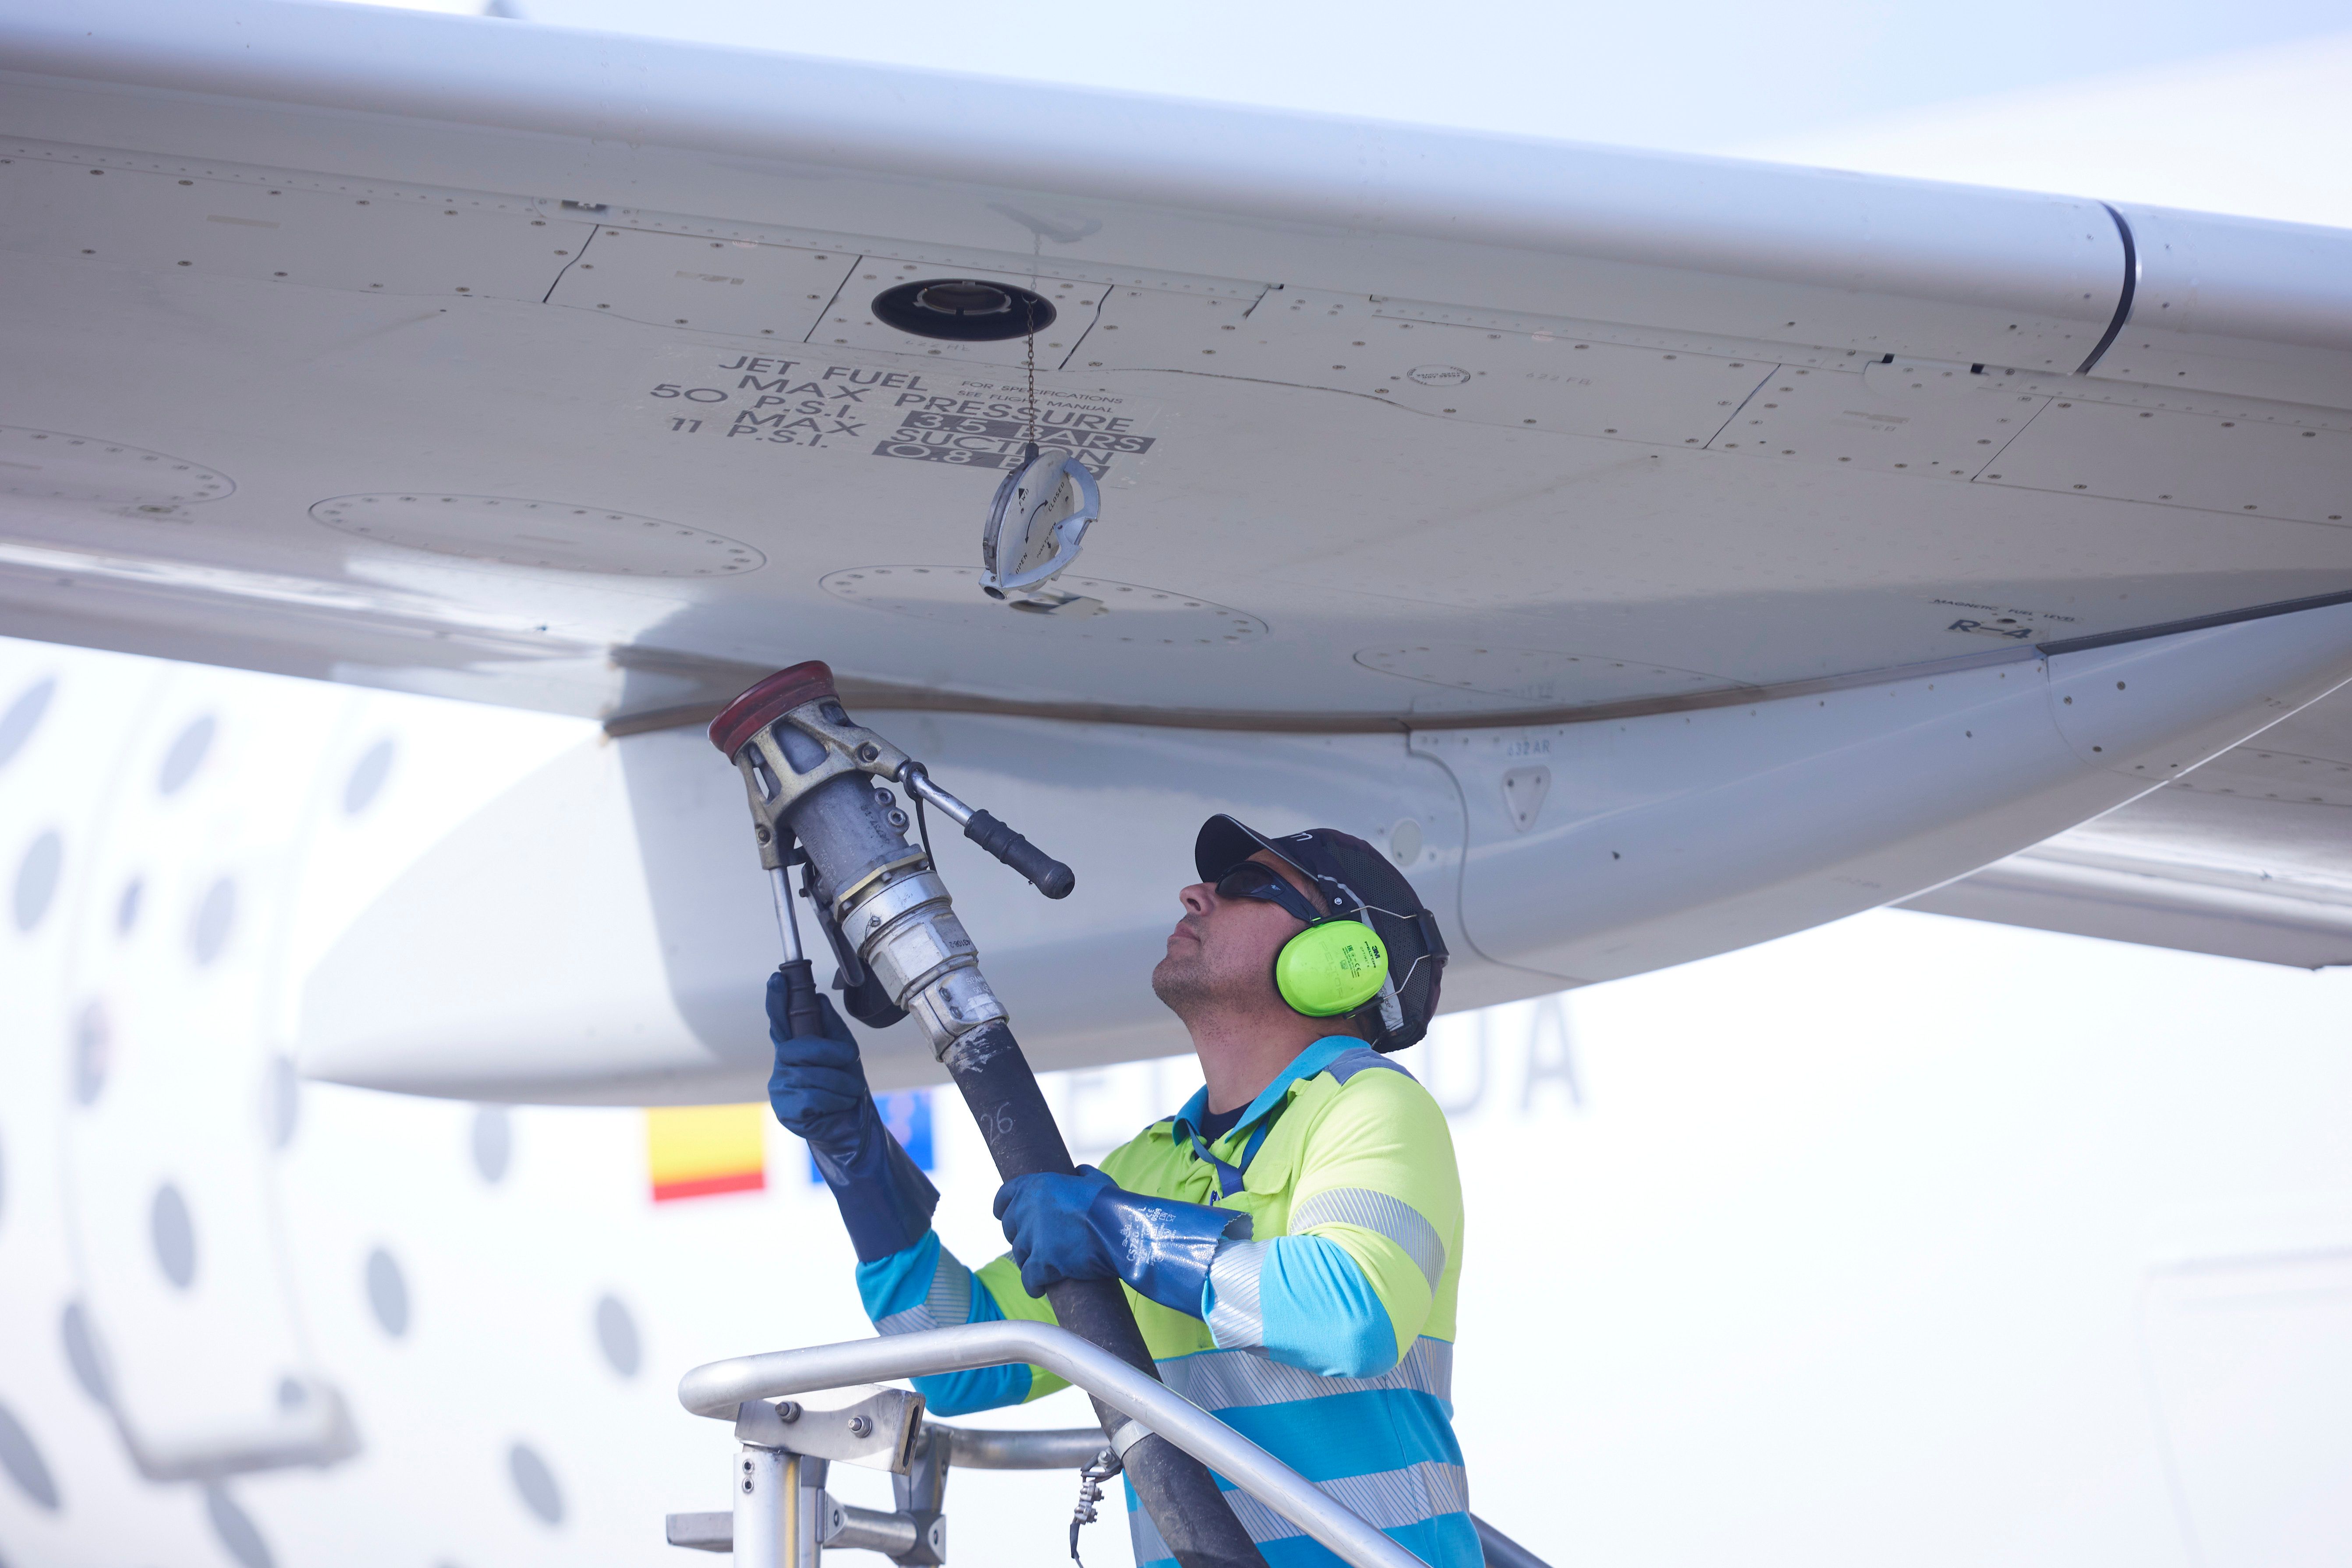 vueling plane refueled with sustainable aviation fuel in Spain